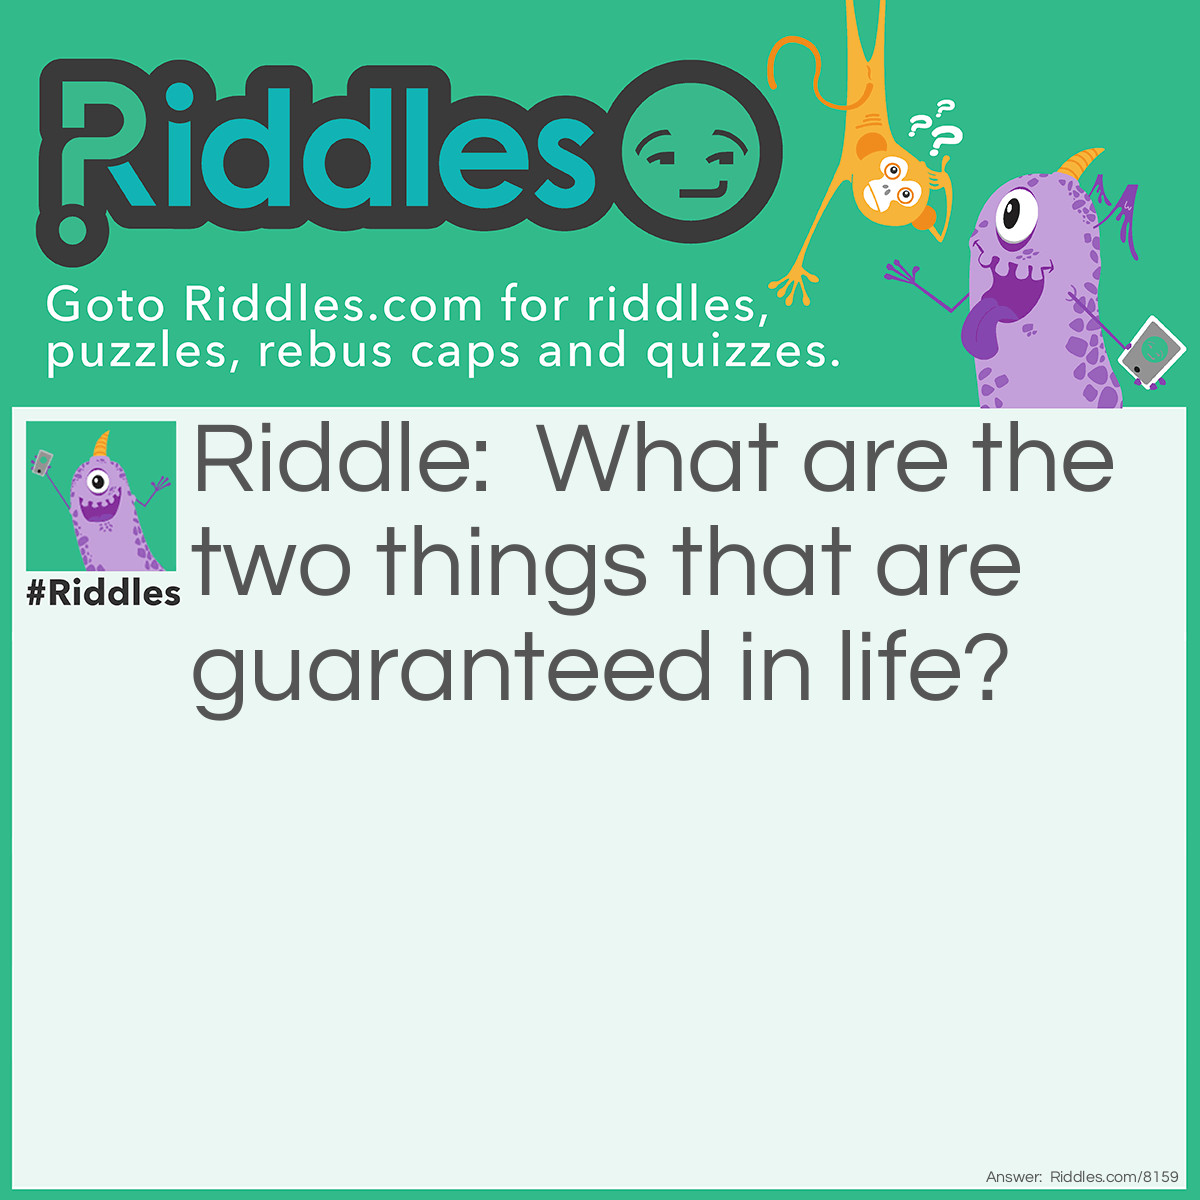 Riddle: What are the two things that are guaranteed in life? Answer: Taxes and death.